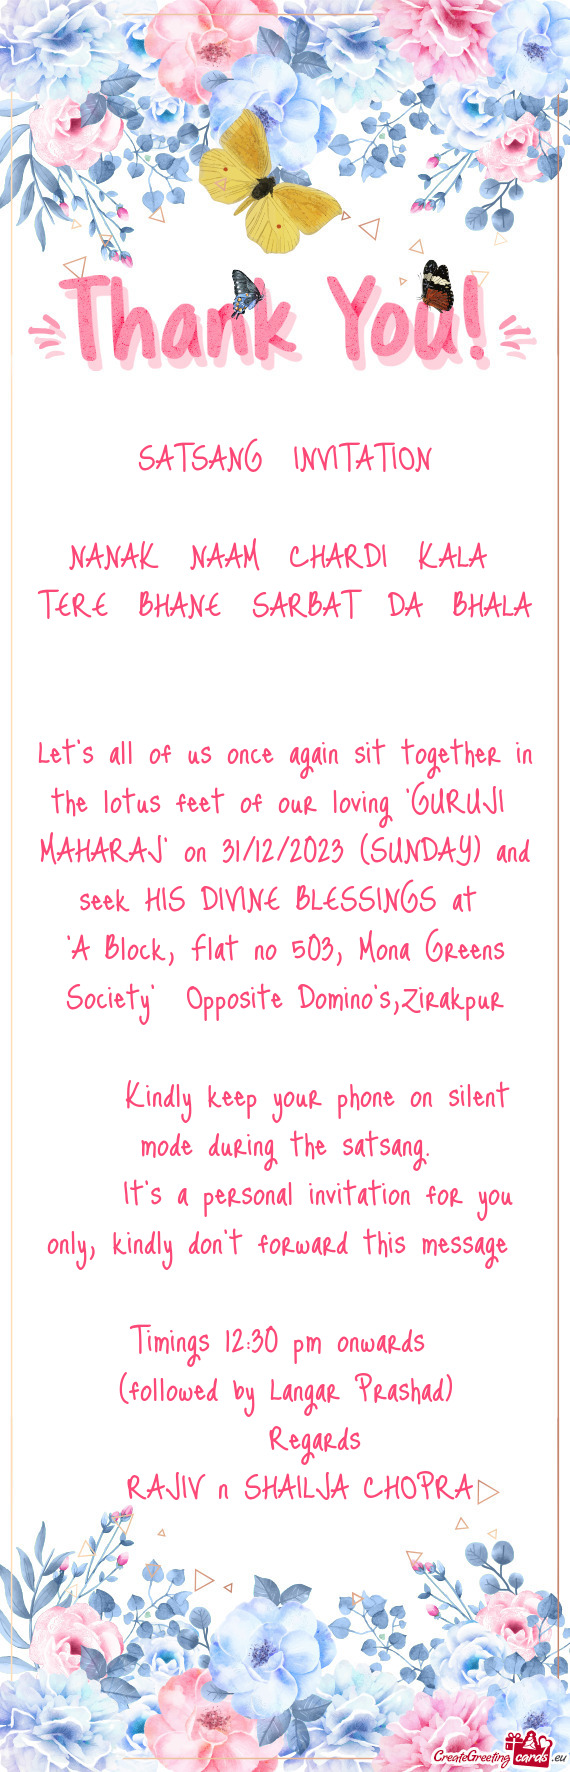 023 (SUNDAY) and seek HIS DIVINE BLESSINGS at